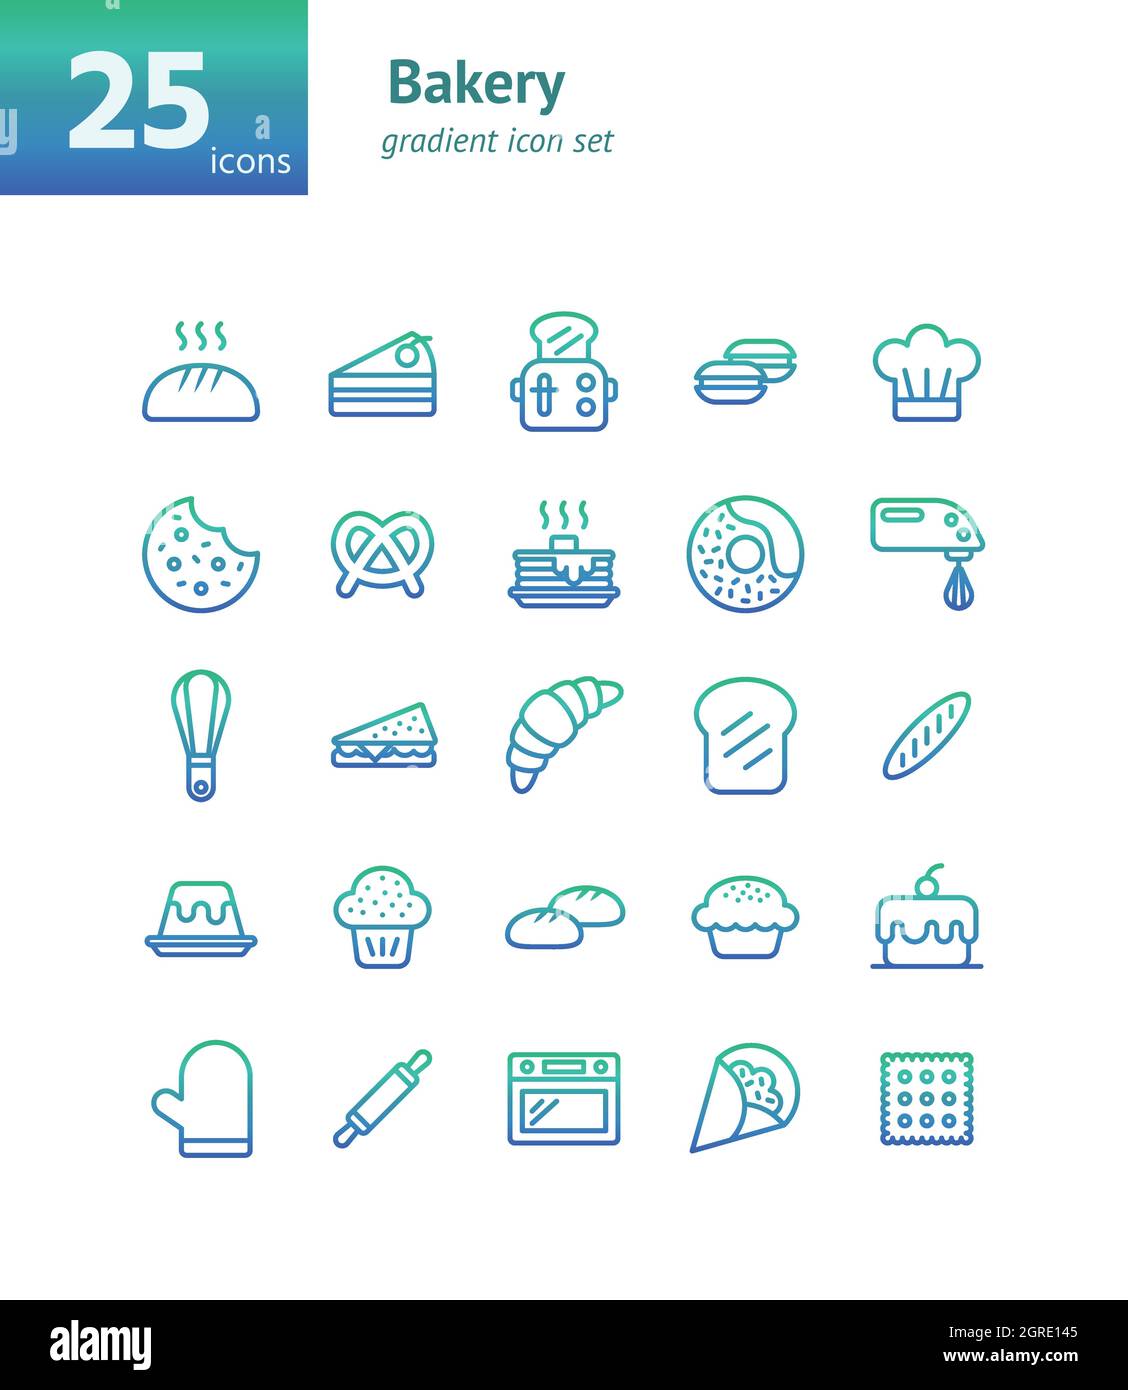 Bakery gradient icon set. Vector and Illustration. Stock Vector